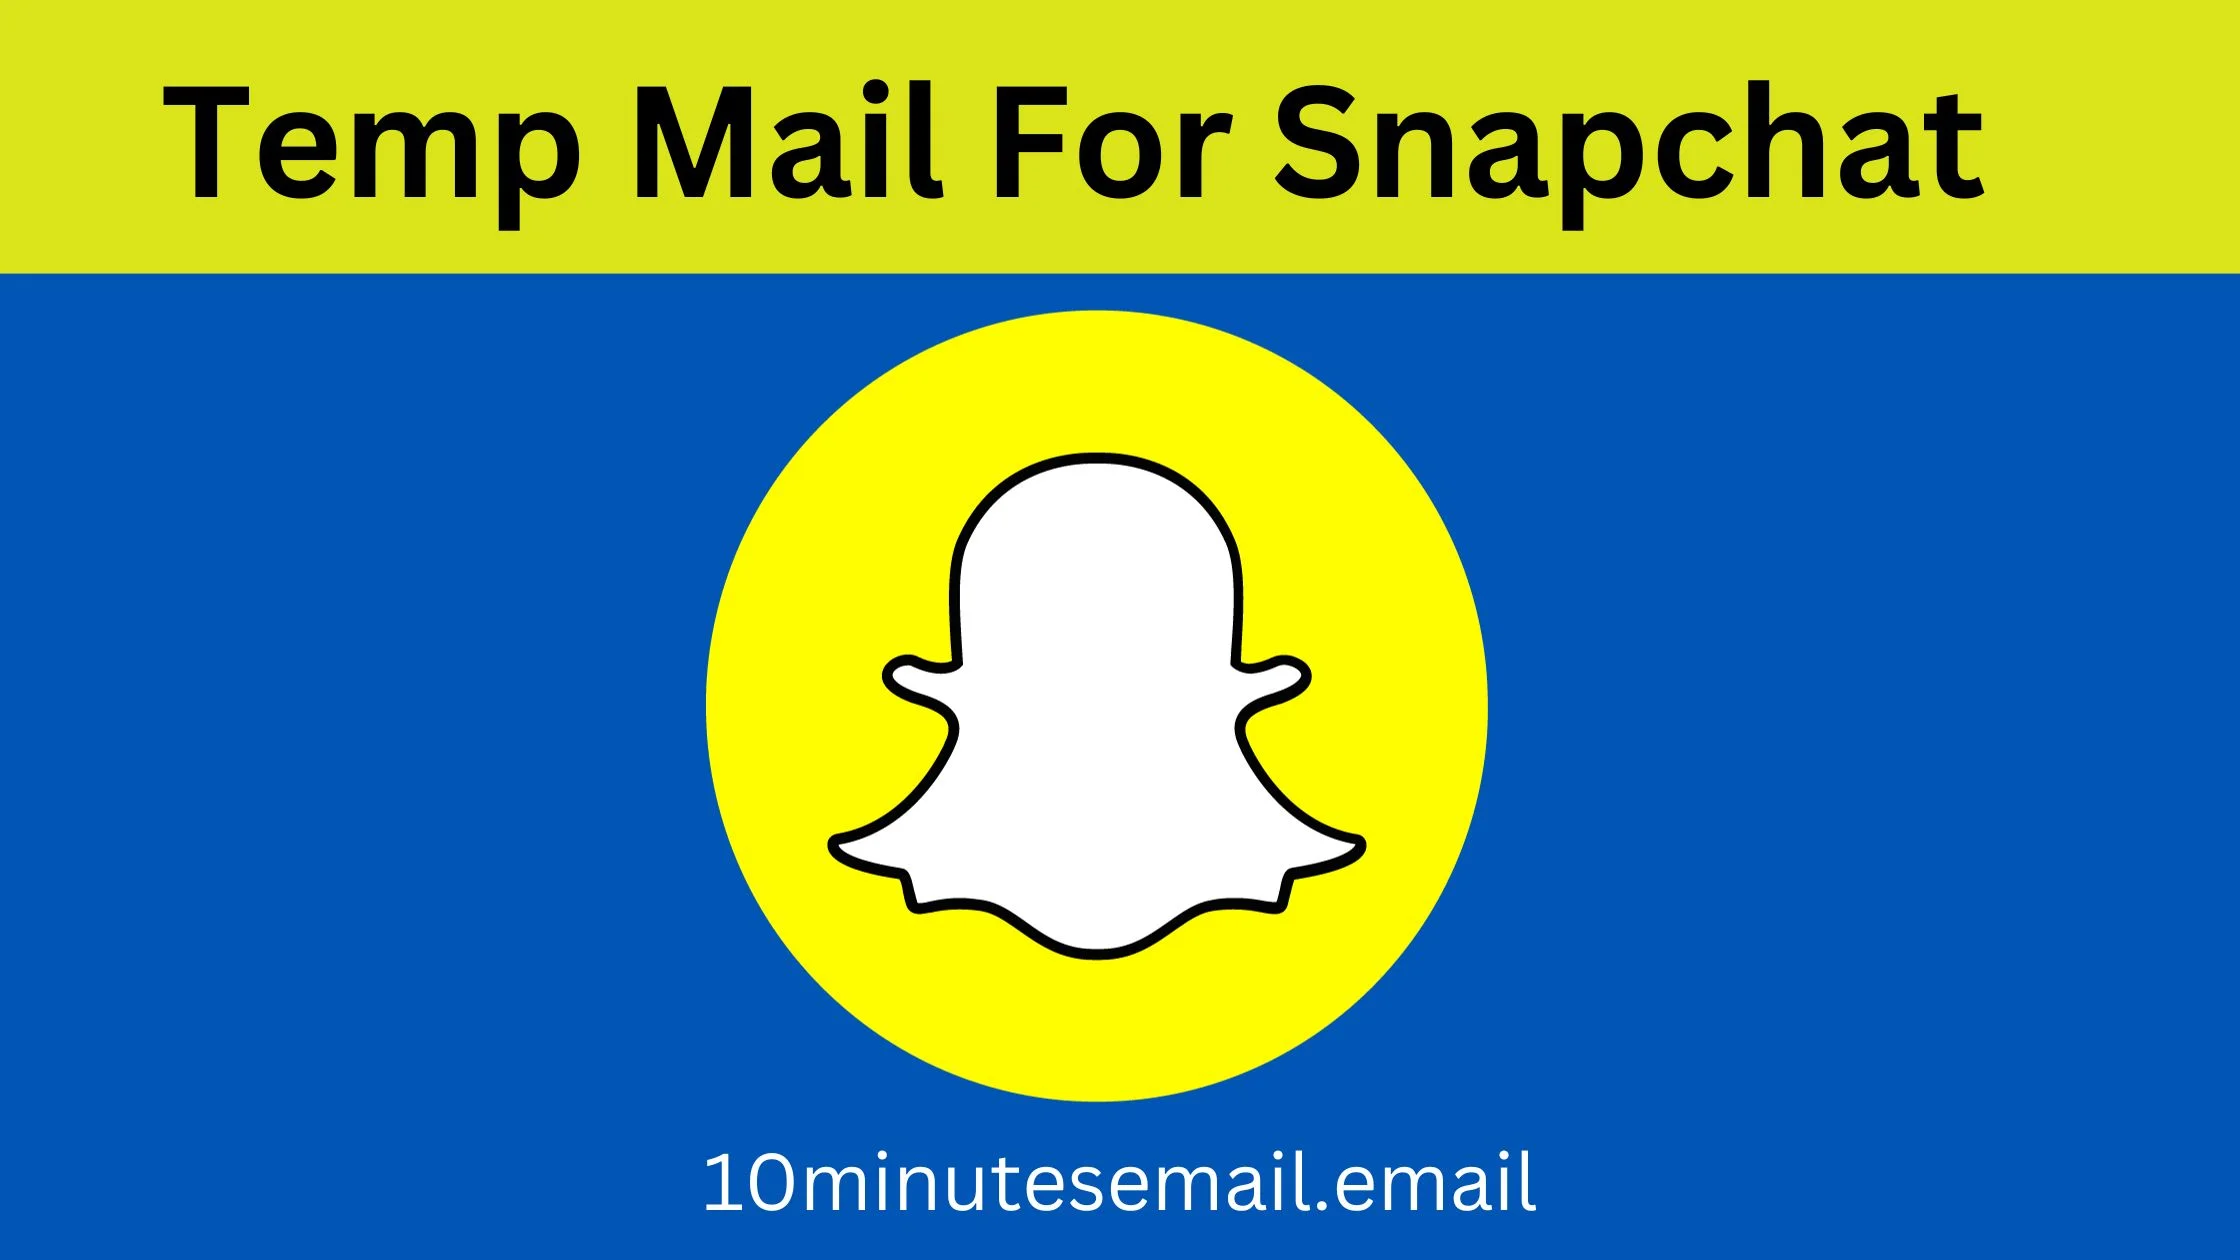 10 Minutes Email for Snapchat